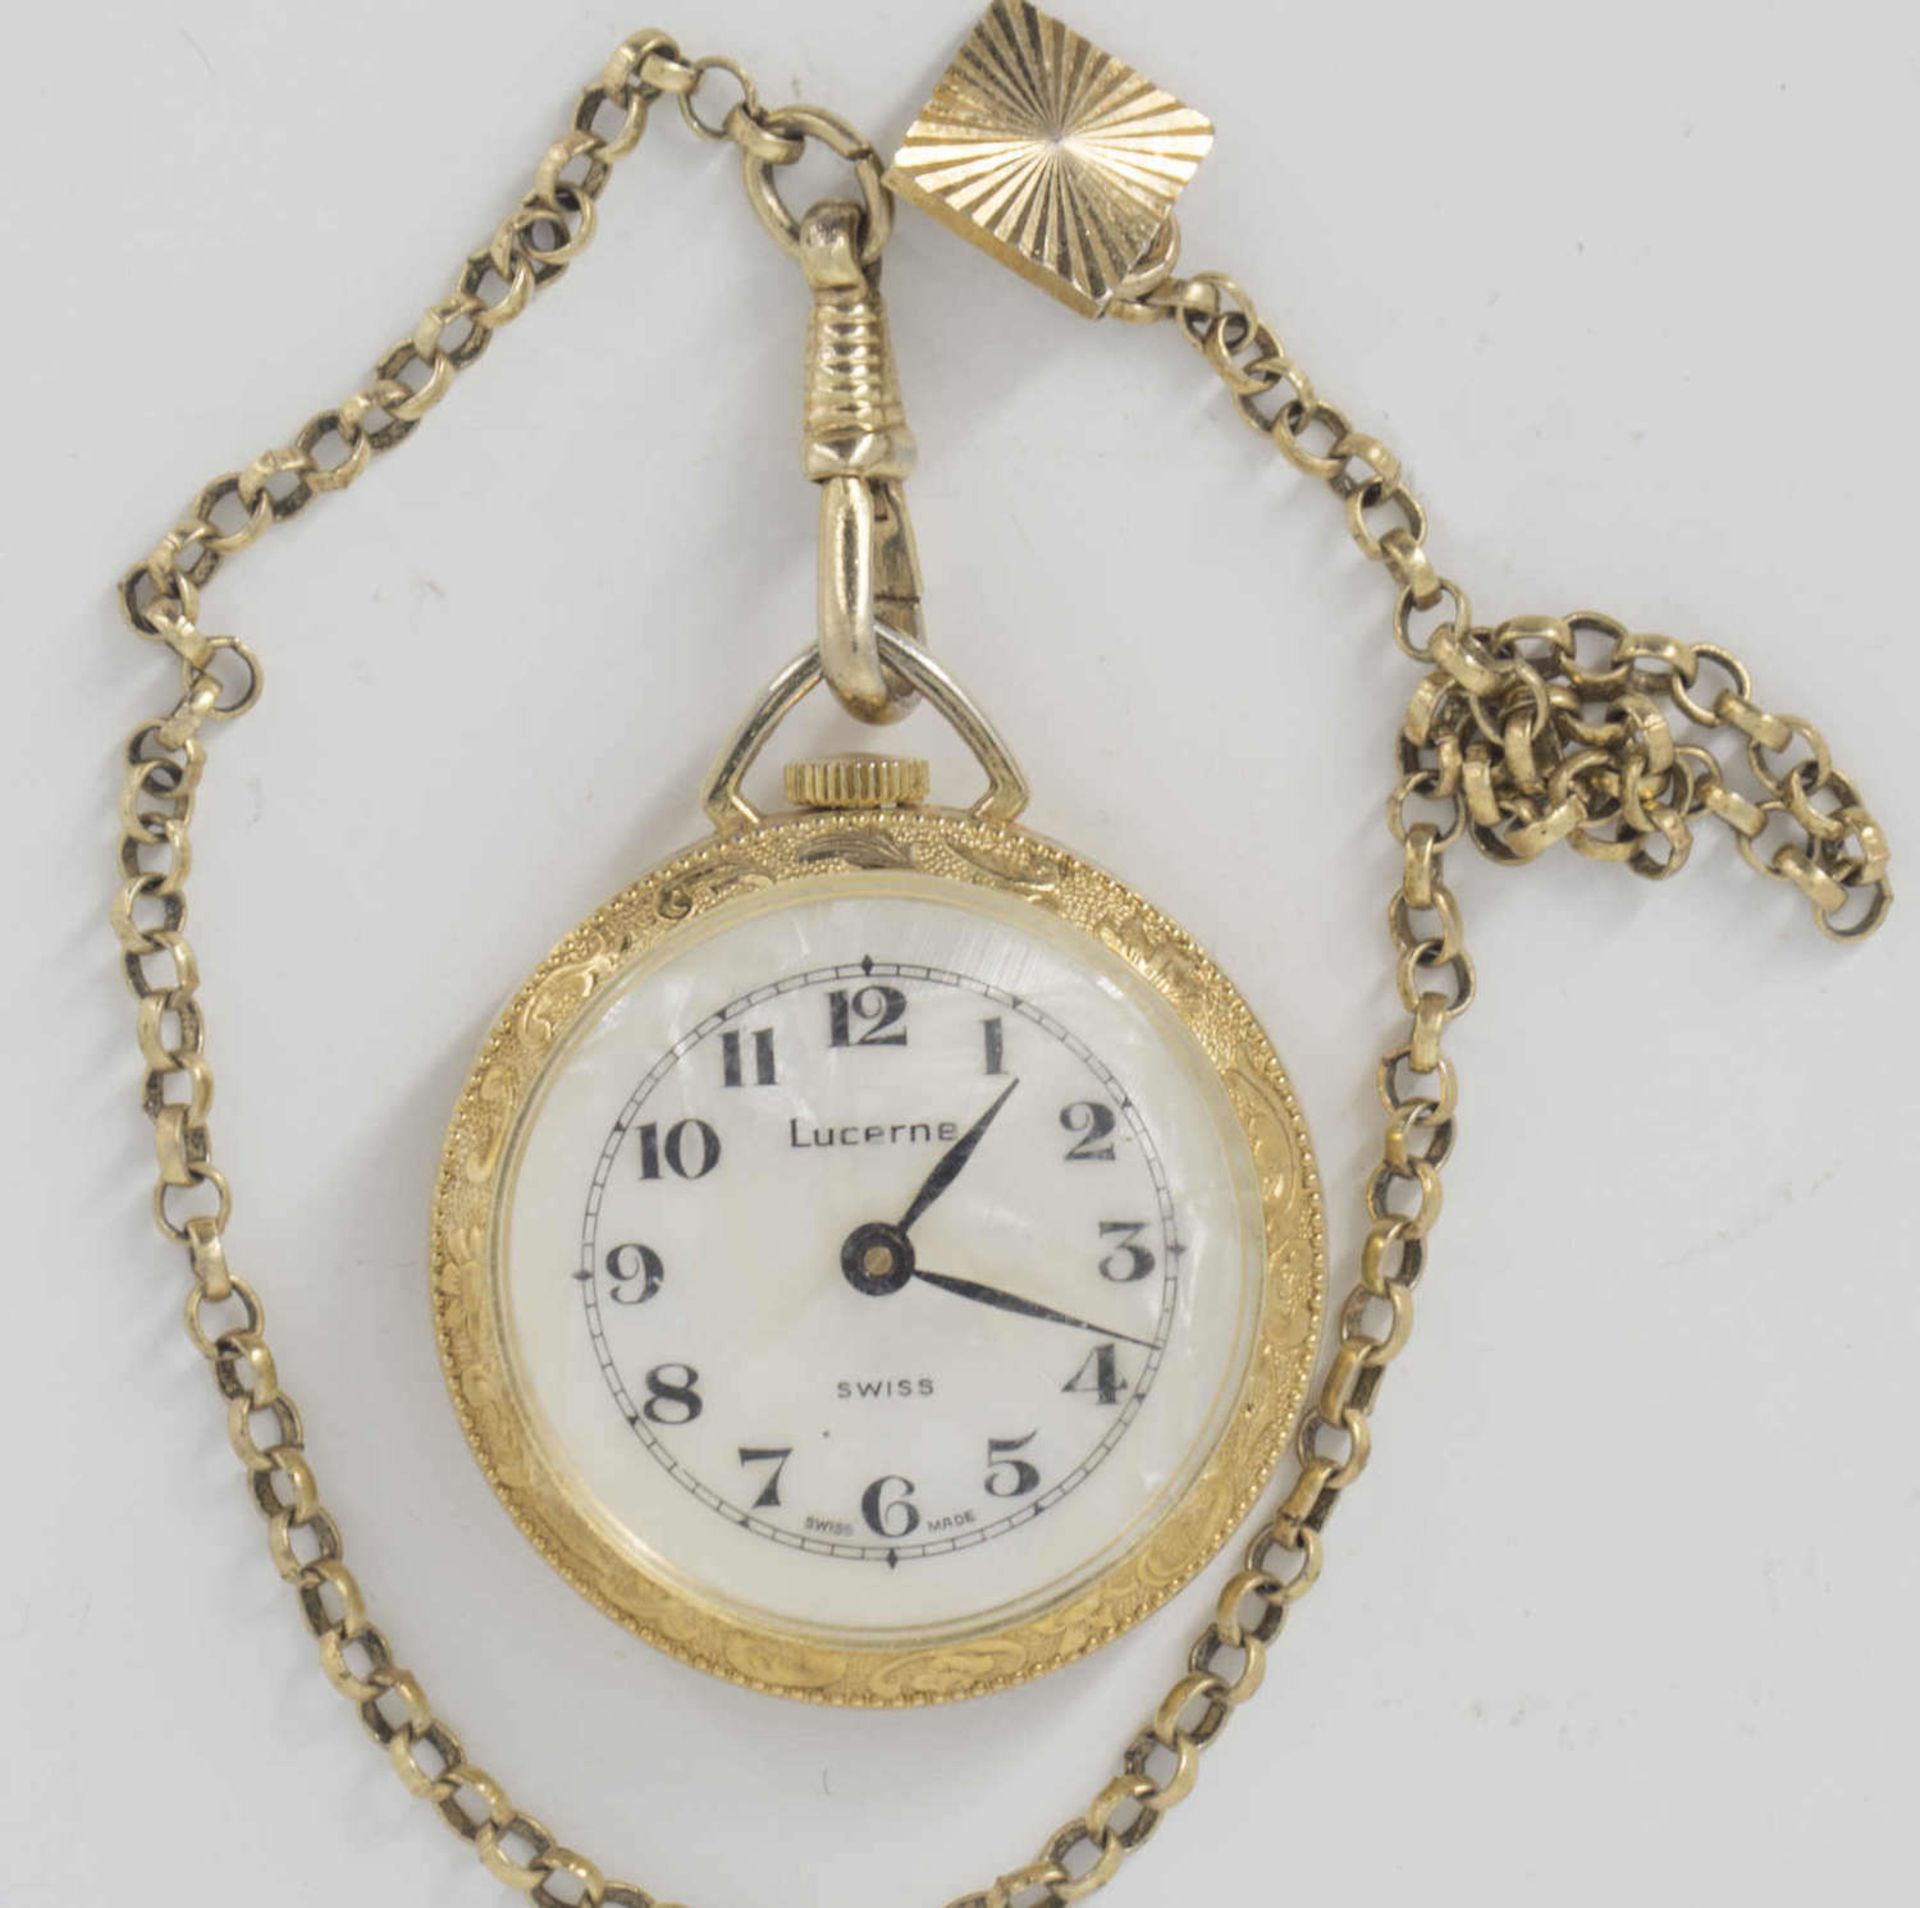 Lucerne pocket watch, manual wind, with watch chain. The clock starts.